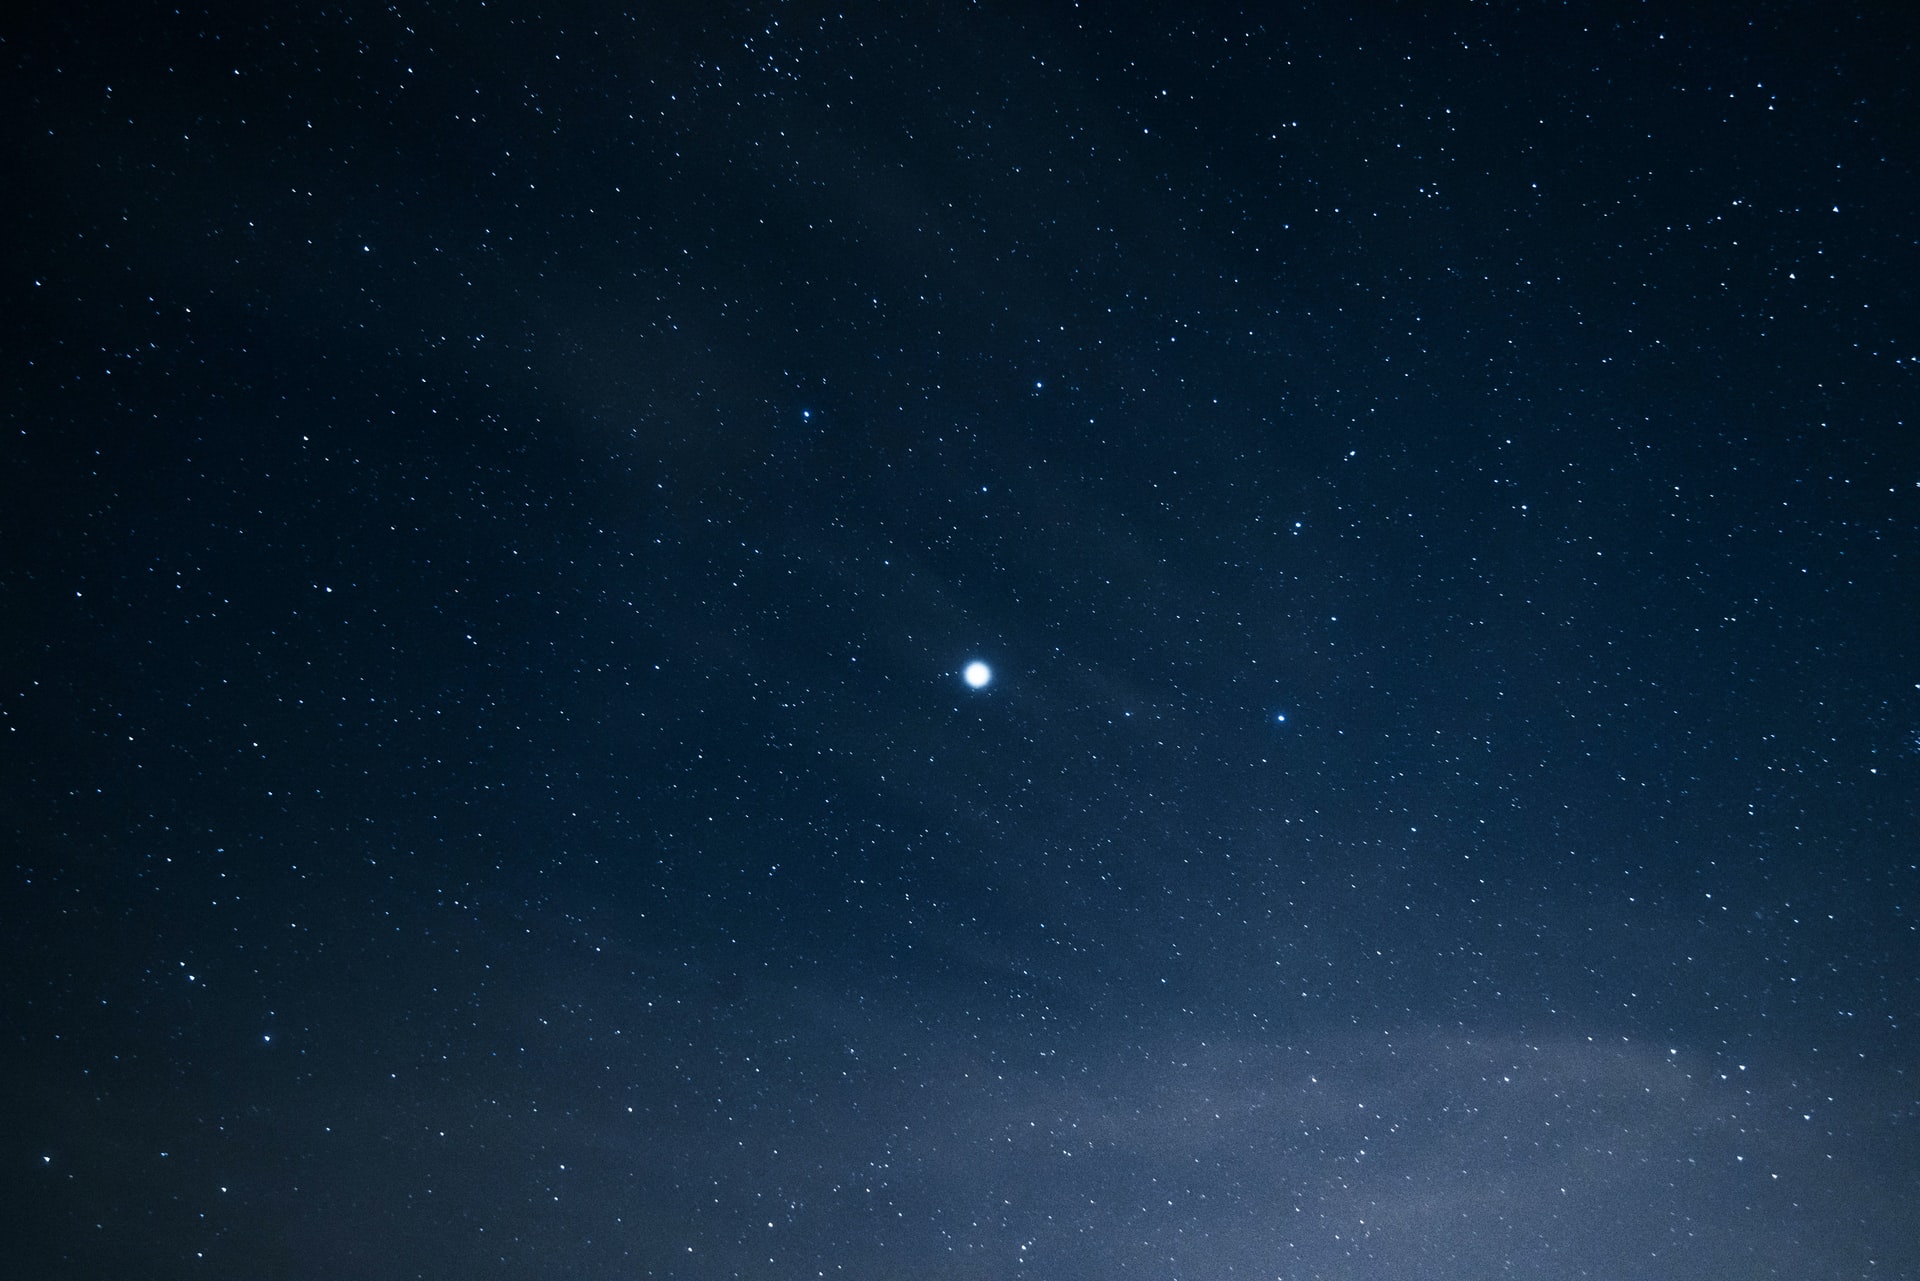 One bright star in a starry night sky.